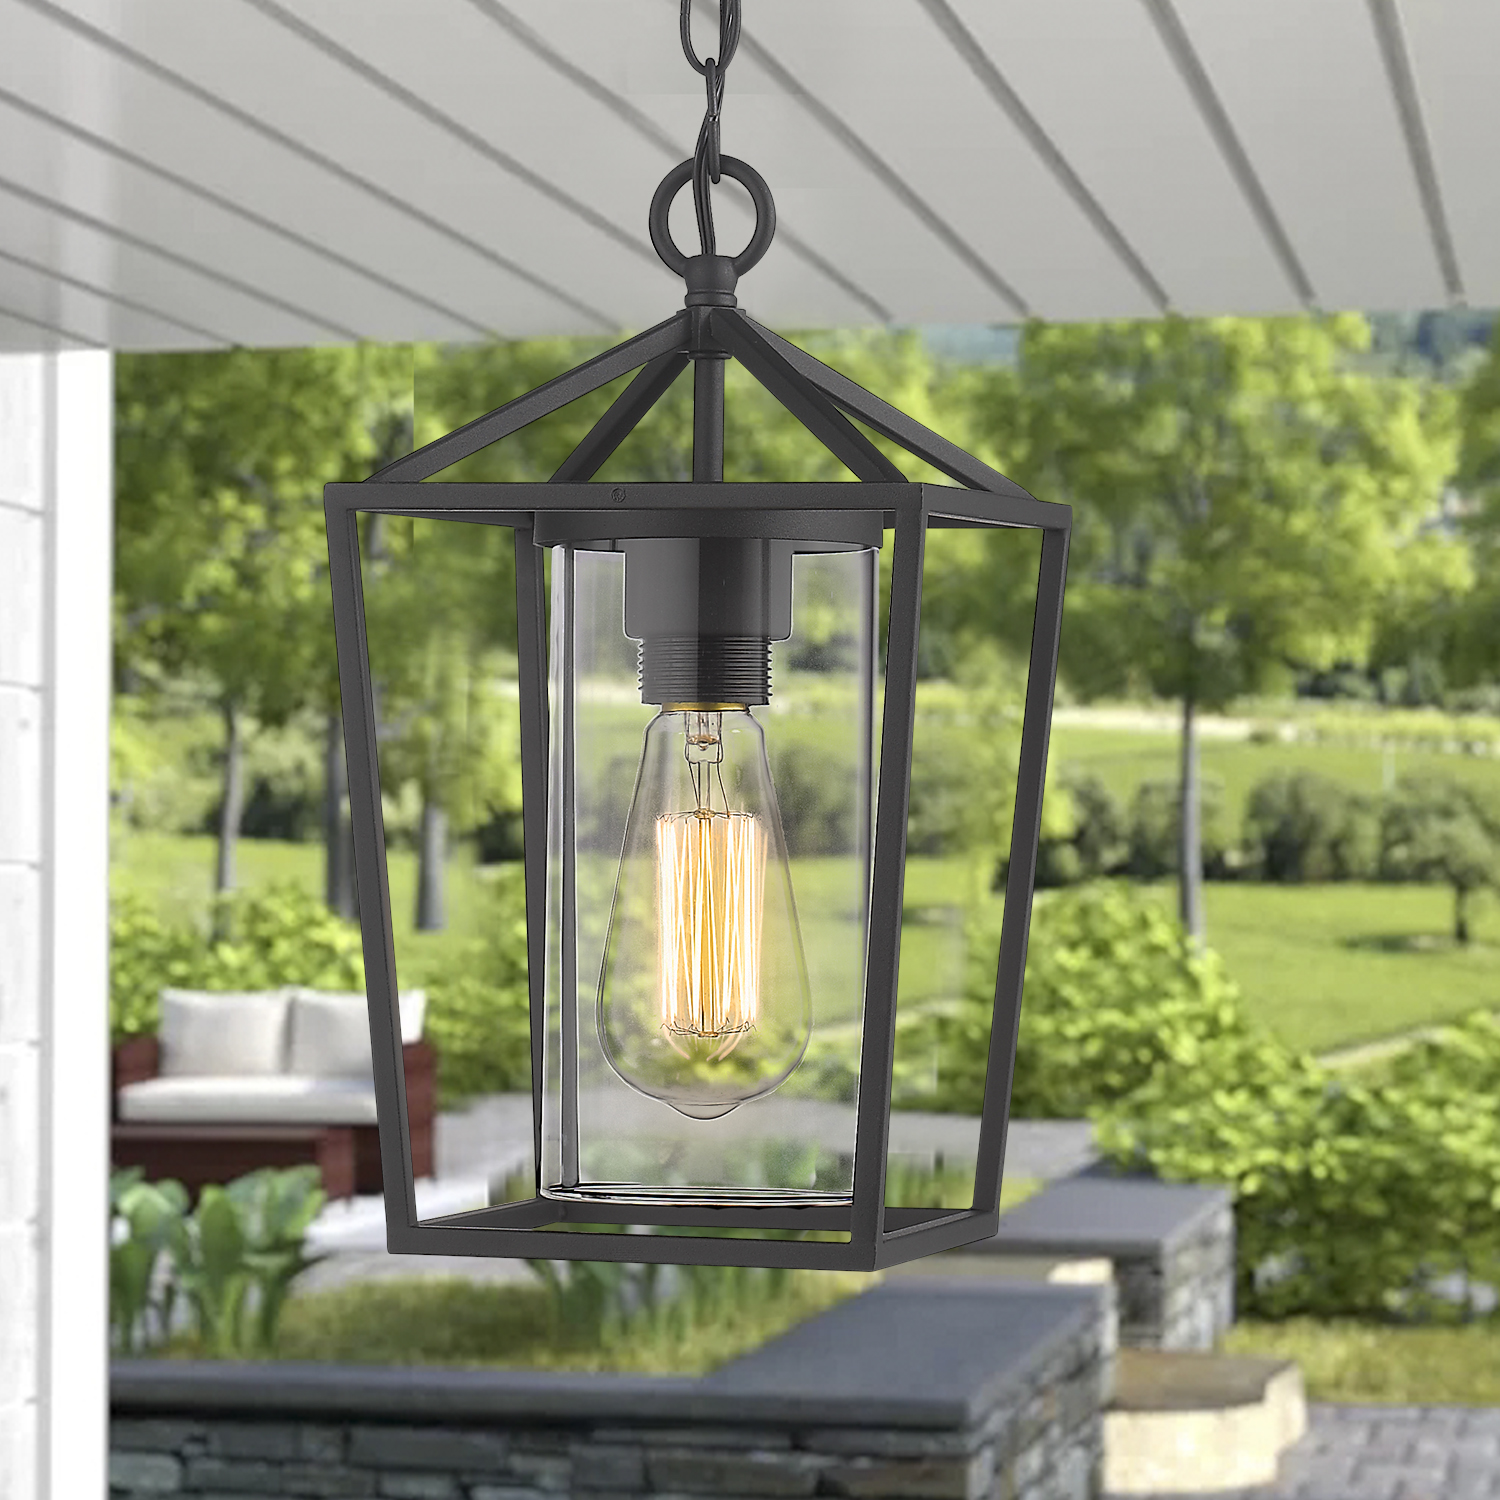 Black Modern Outdoor Pendant Light Caged 1-Light Outdoor Hanging Lantern Light Balck Finish with Cylinder Clear Glass Outdoor Weather Resistant Pendant Light for Wet Location - image 4 of 10